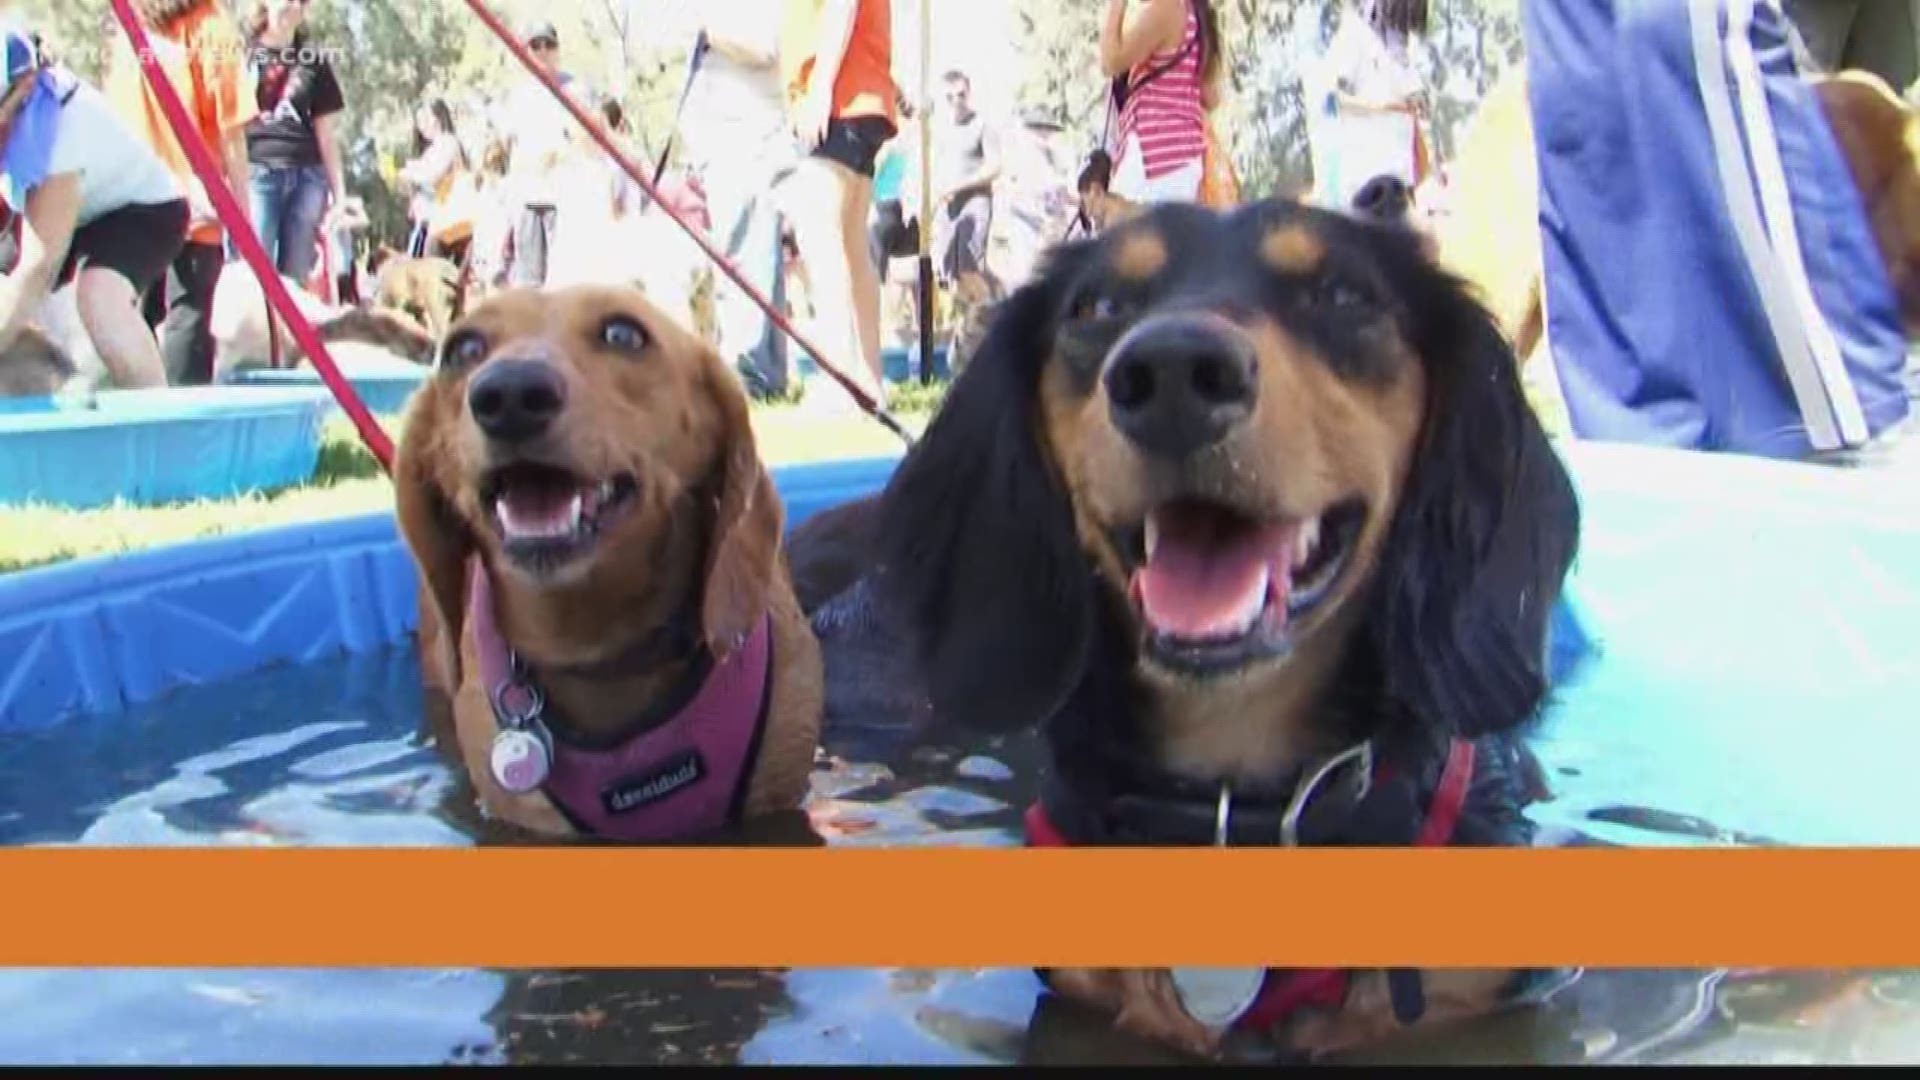 You can help local charities by participating in Riverside Park on Saturday from 9 to noon to 'Strut Your Mutt.'